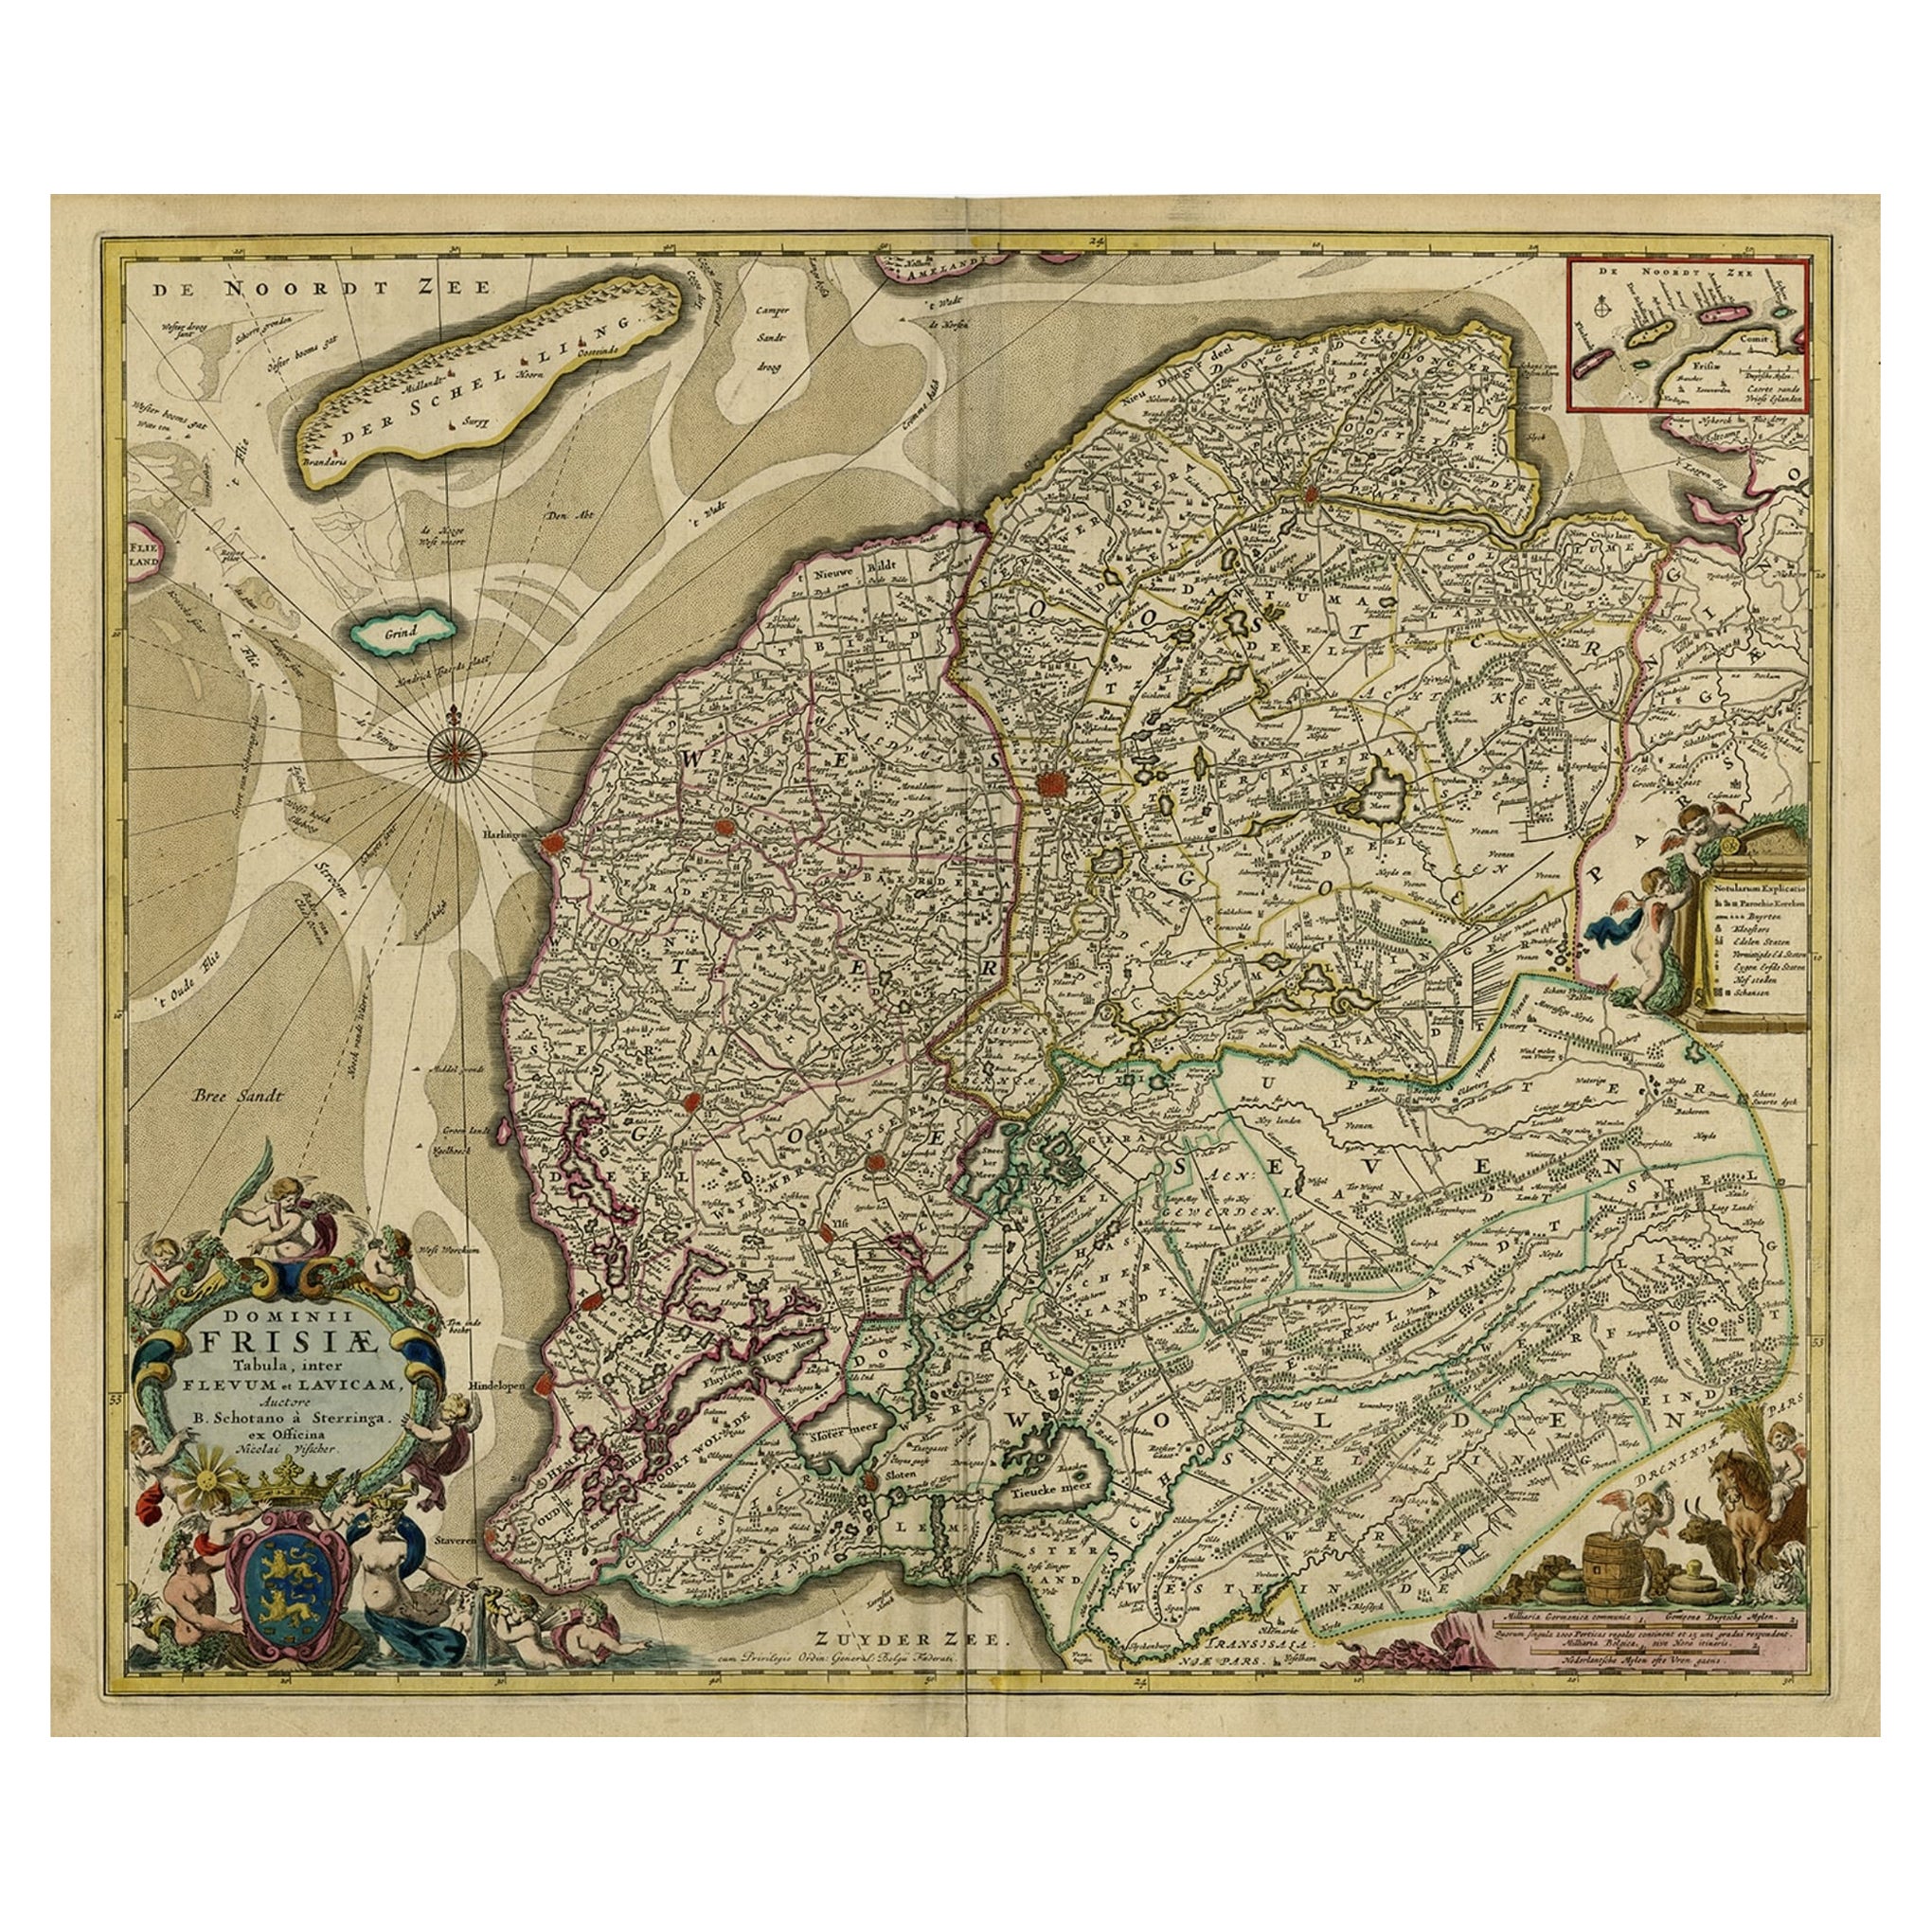 Large Copper Engraved Map of the Coastline of Friesland and Terschelling, c.1670